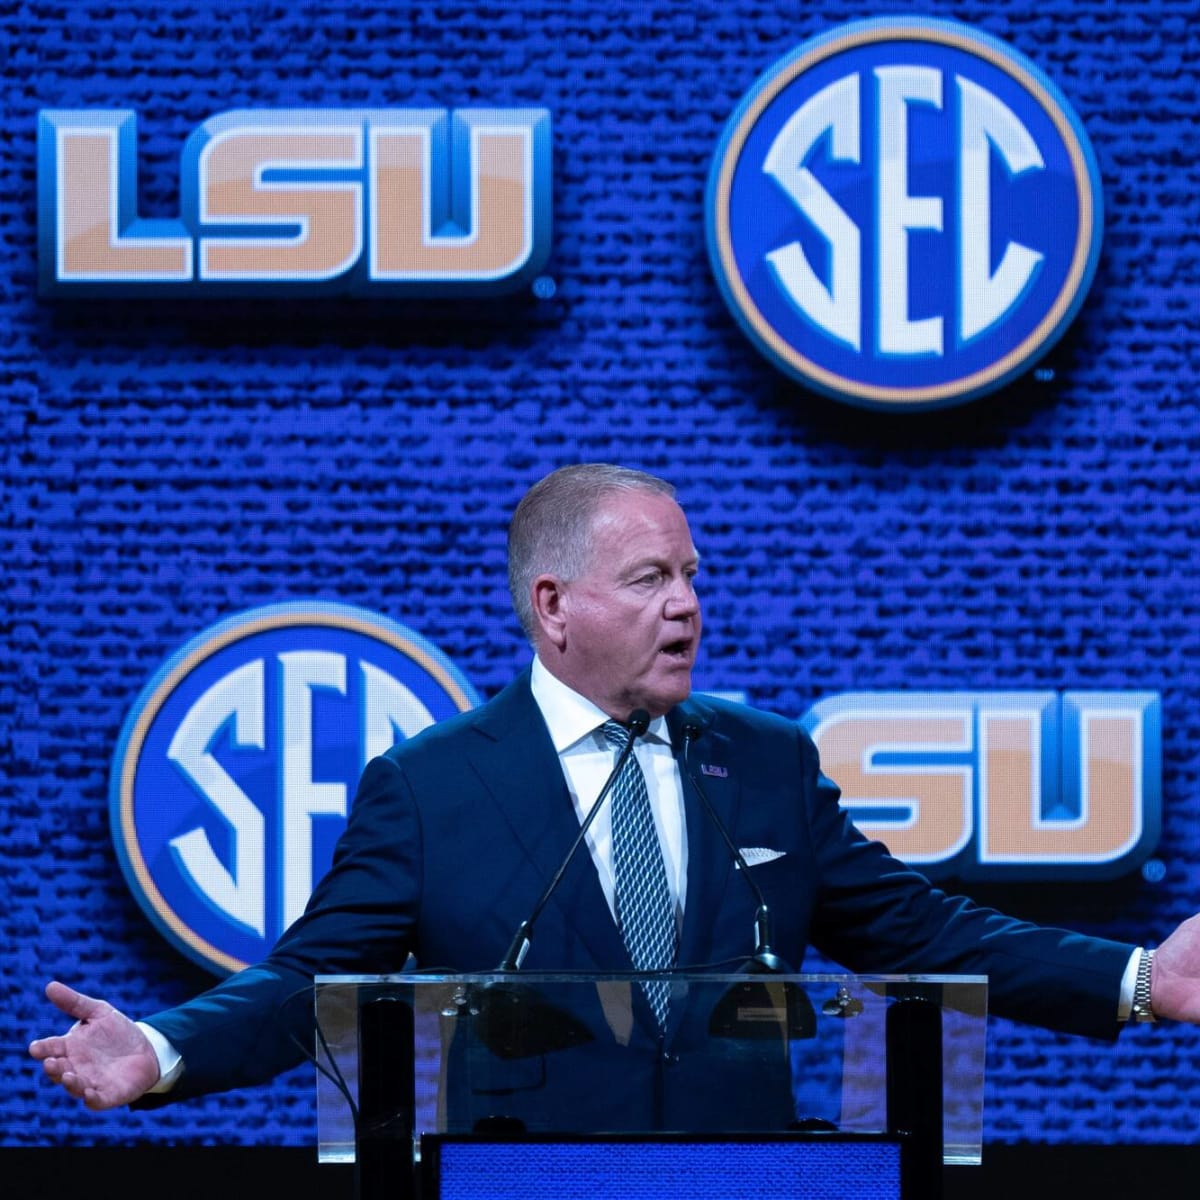 LSU coach Brian Kelly's pre-game comments come back to haunt him after  humbling loss to Florida State in primetime